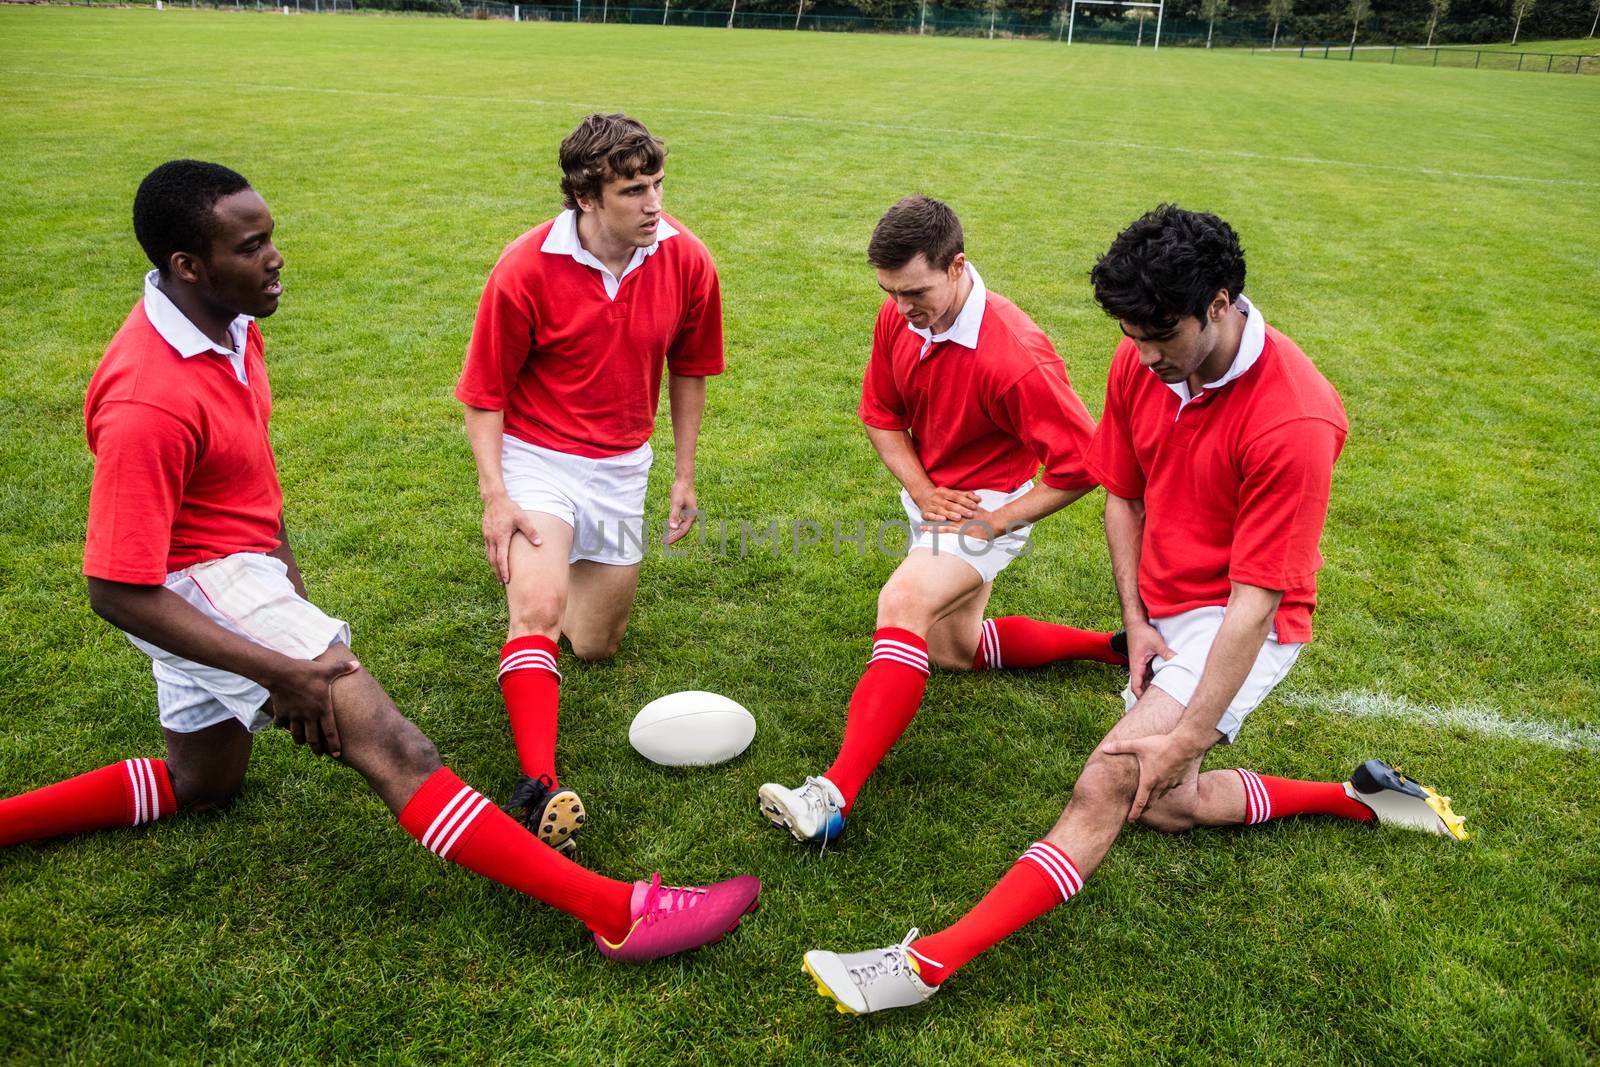 Rugby players warming up before match by Wavebreakmedia